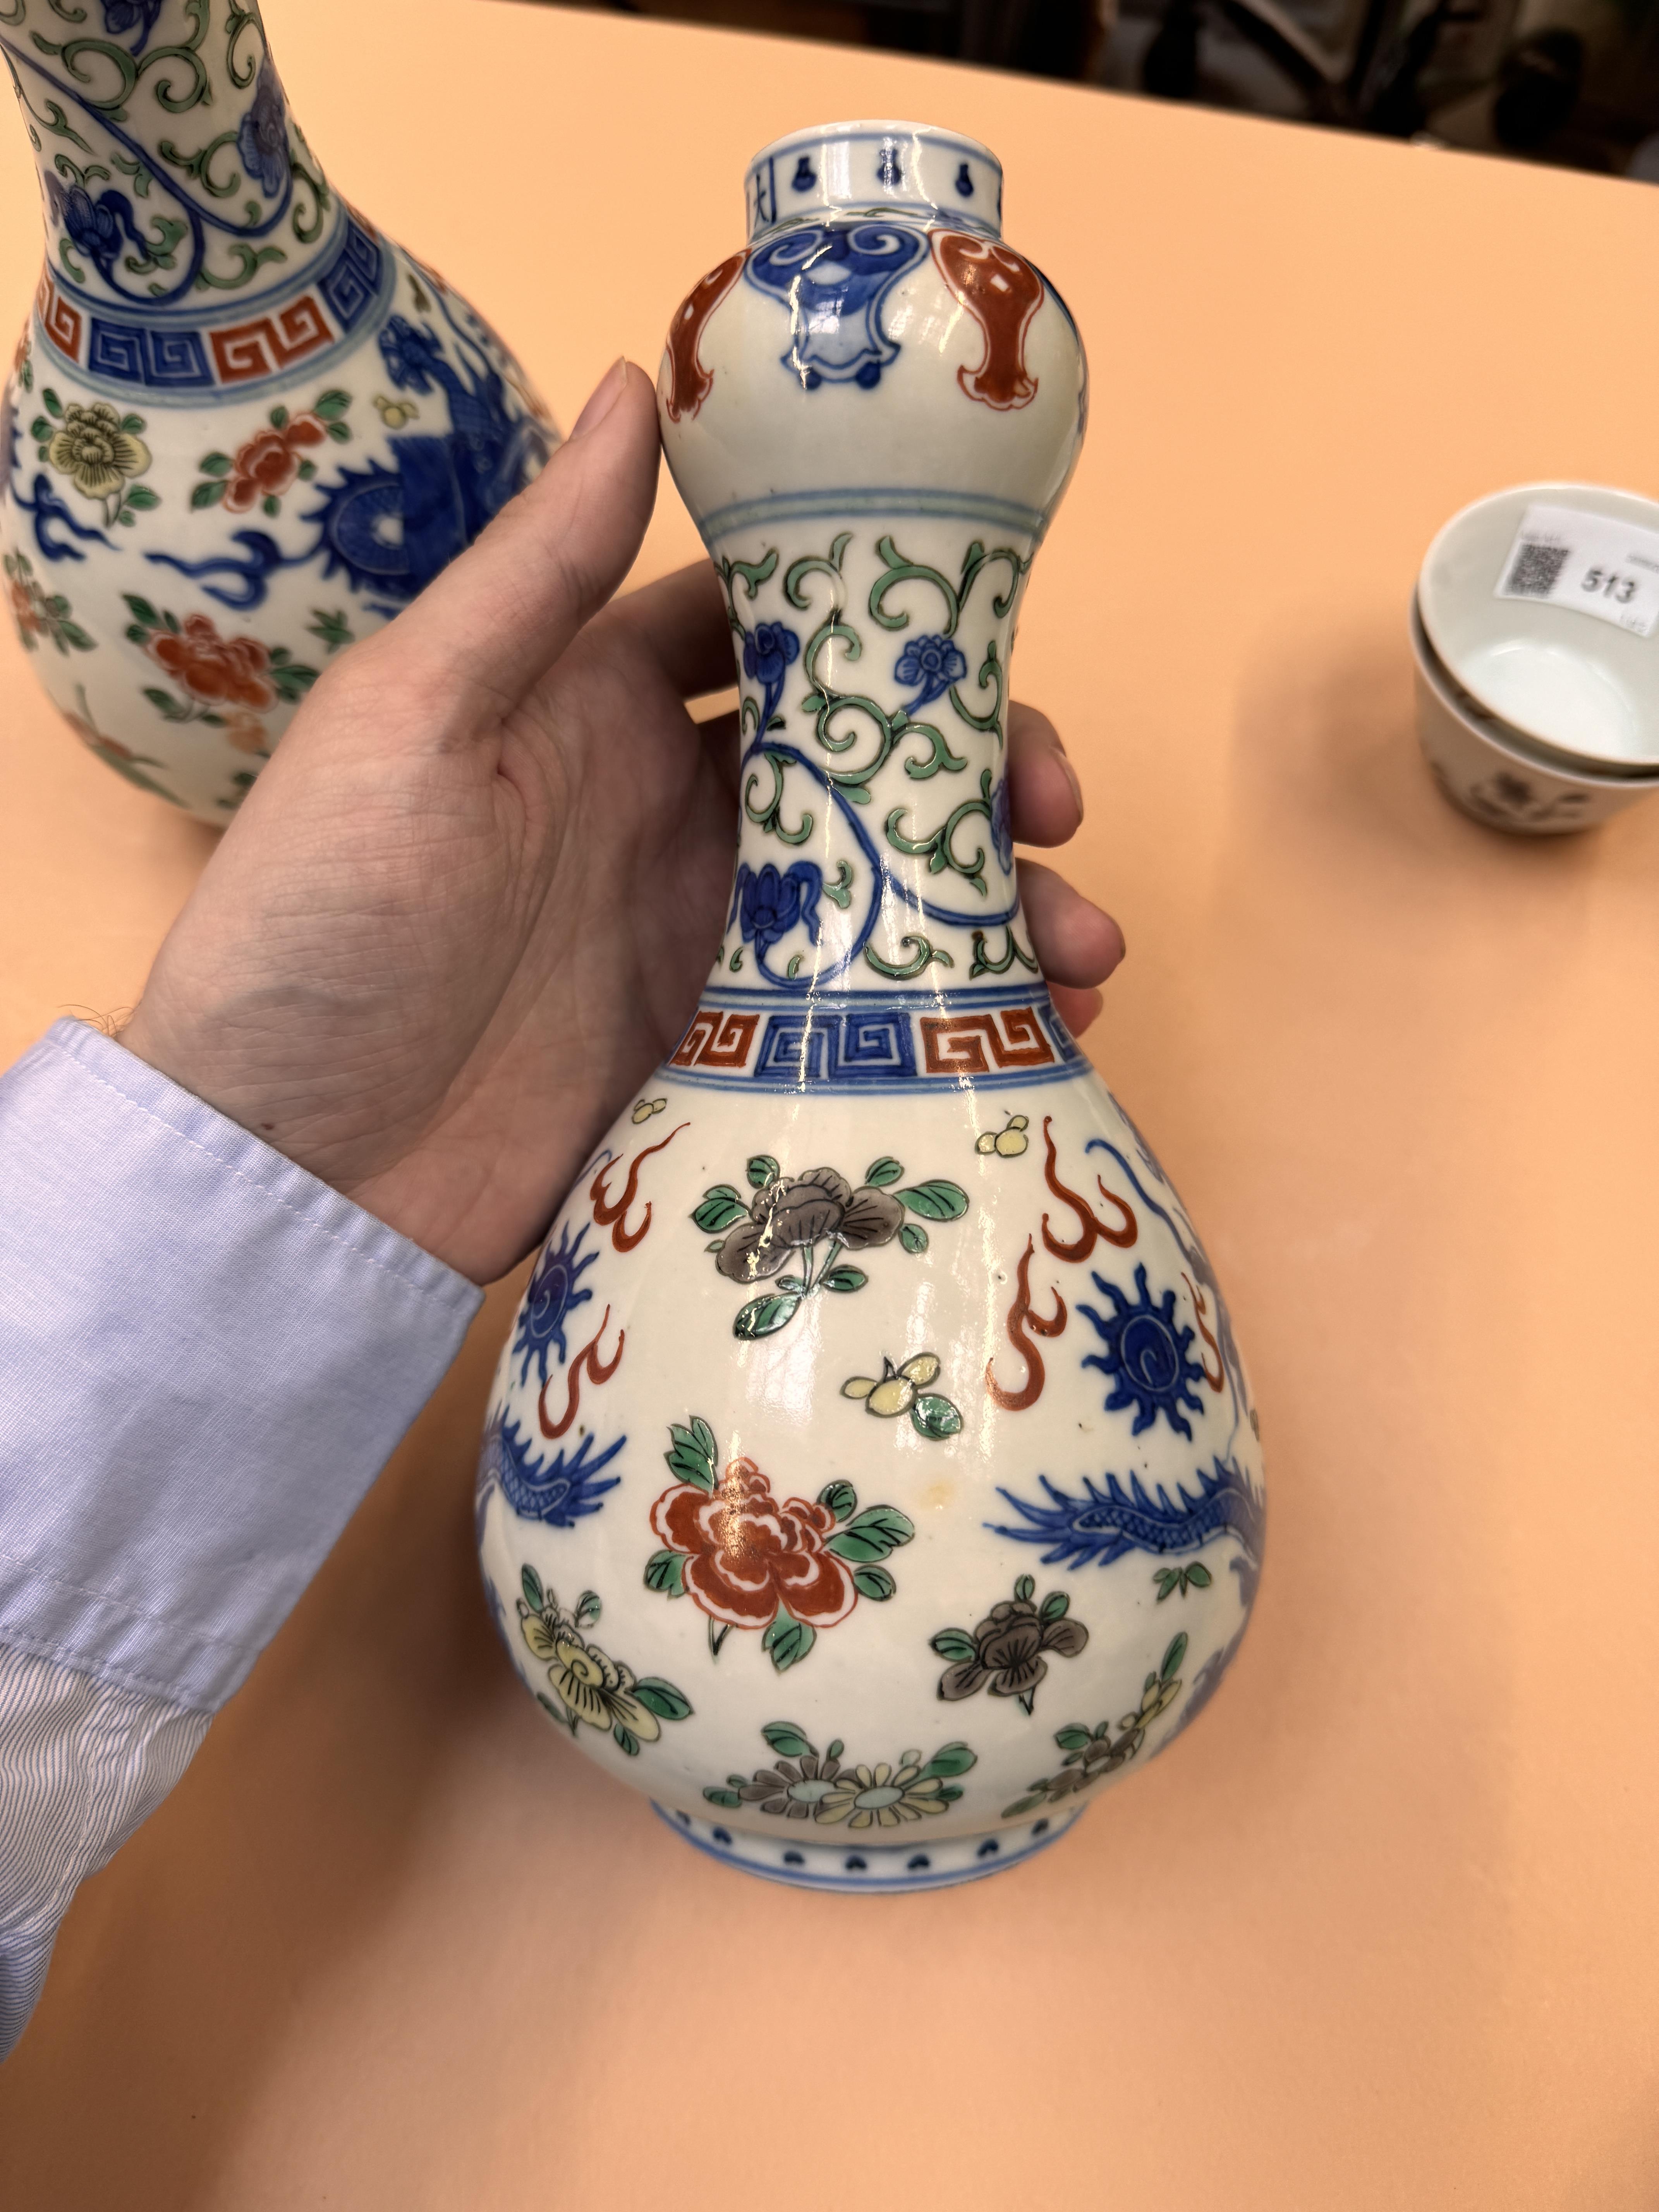 A PAIR OF CHINESE WUCAI 'DRAGON' VASES 民國時期 五彩龍趕珠紋瓶一對 《大明嘉靖年製》款 - Image 12 of 19